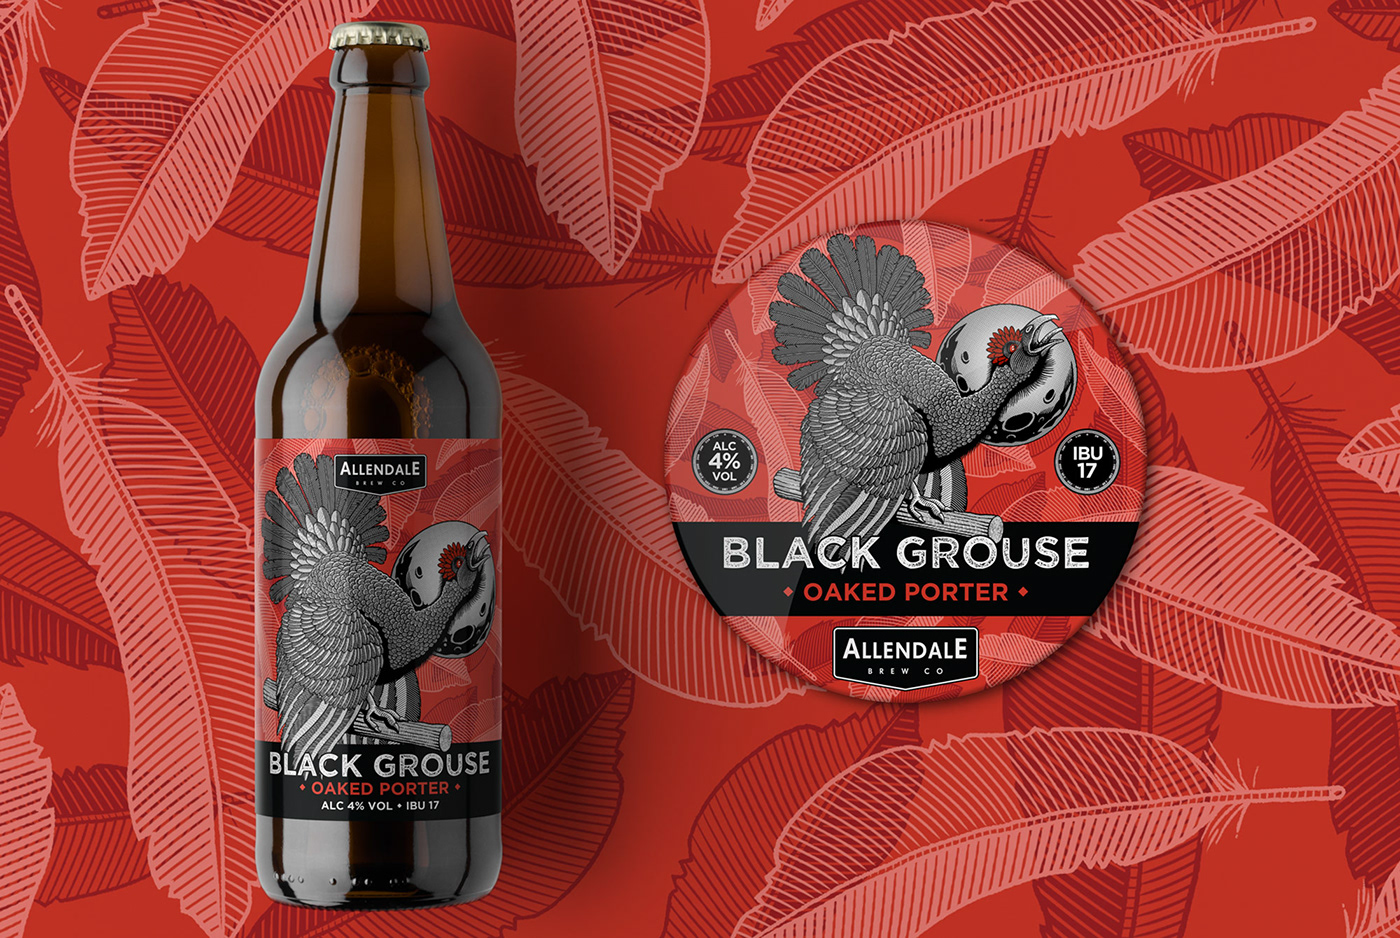 craft beer label design featuring hand-drawn black grouse howling at the full moon